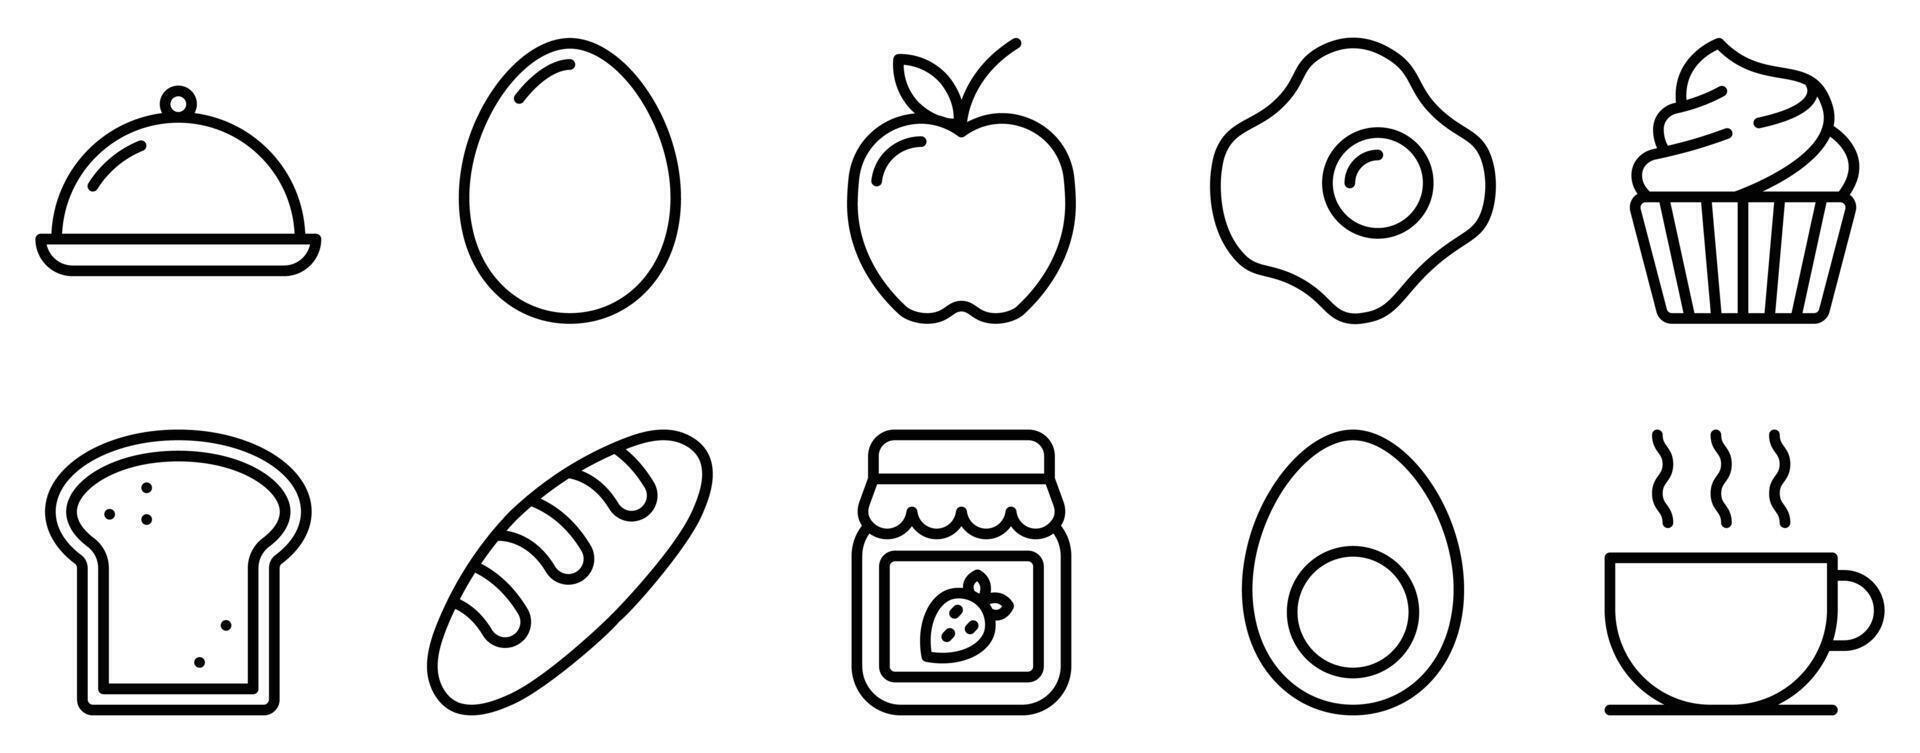 breakfast icon line style set collection vector